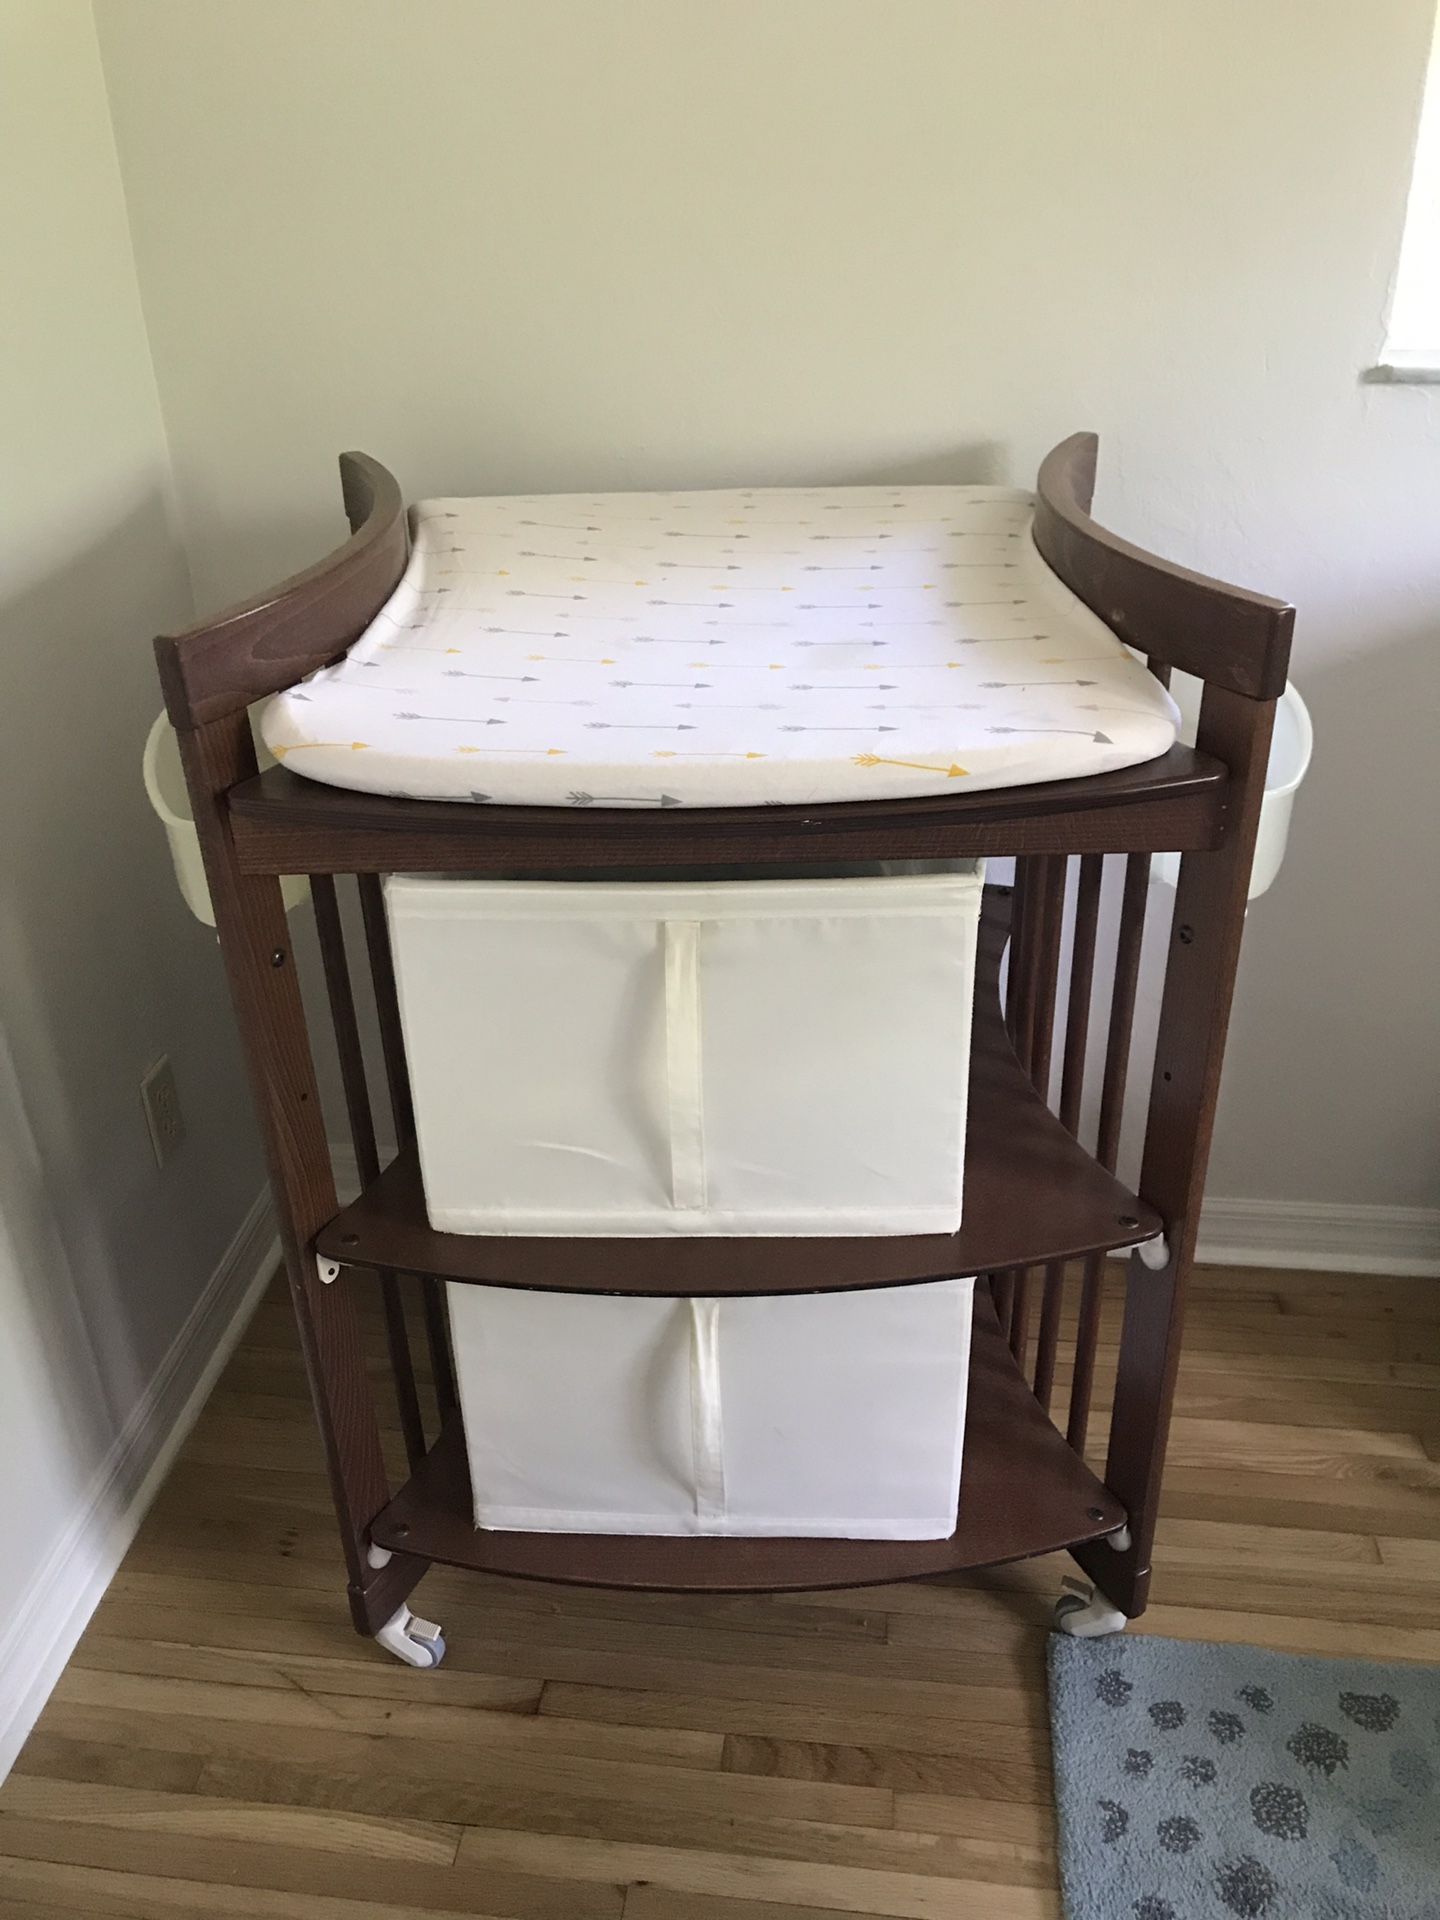 Stokke changing table